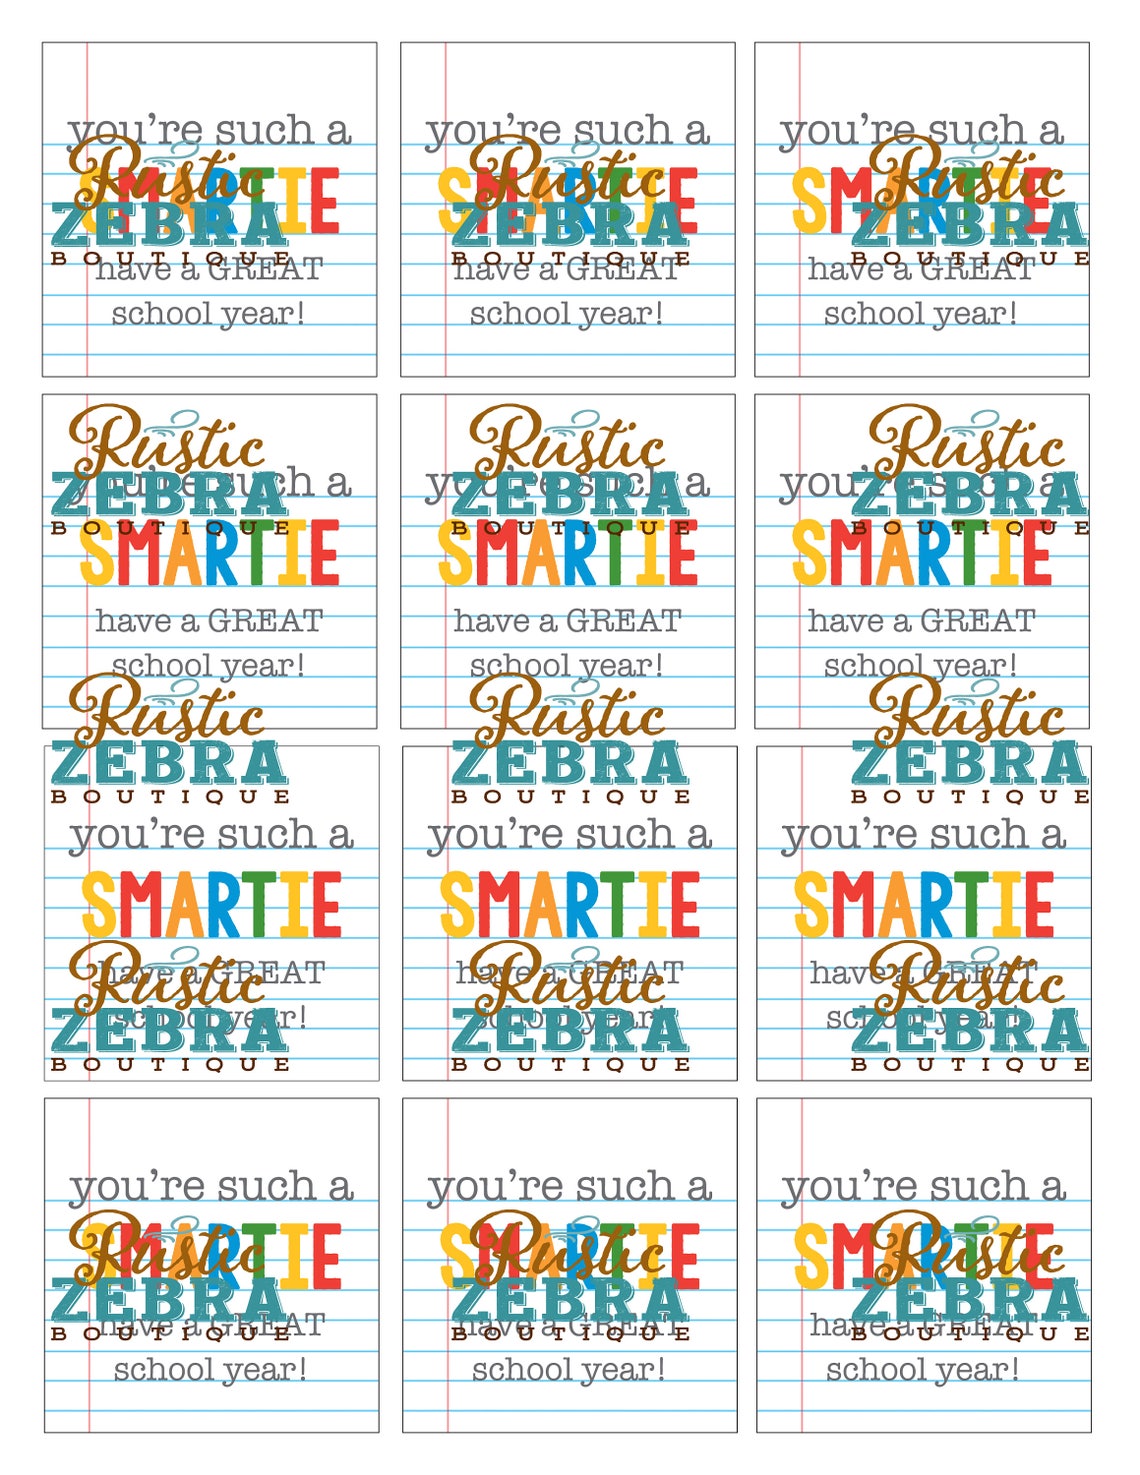 INSTANT DOWNLOAD School Tag You're Such a Smartie Etsy